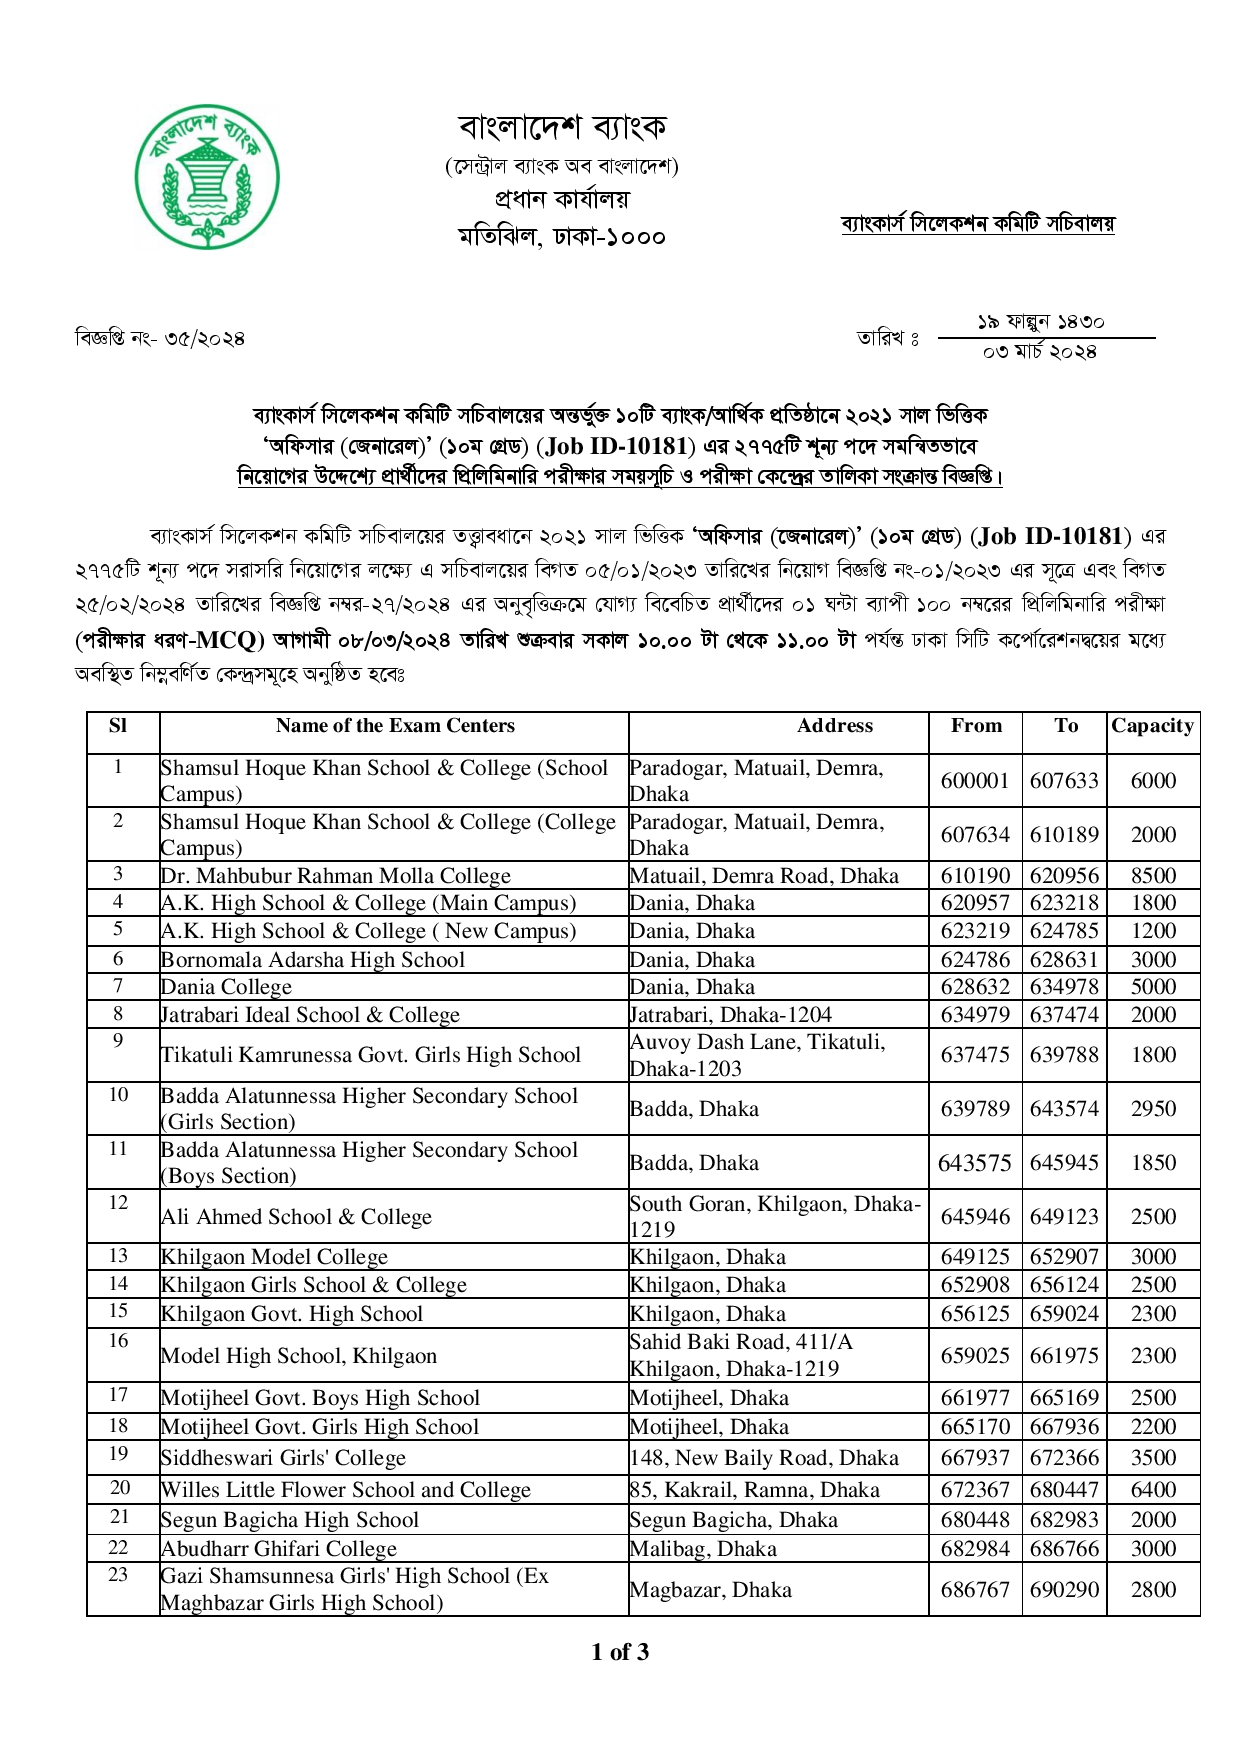 Bangladesh Bank Officer (General-10181) Preliminary Exam Schedule and Exam Center List